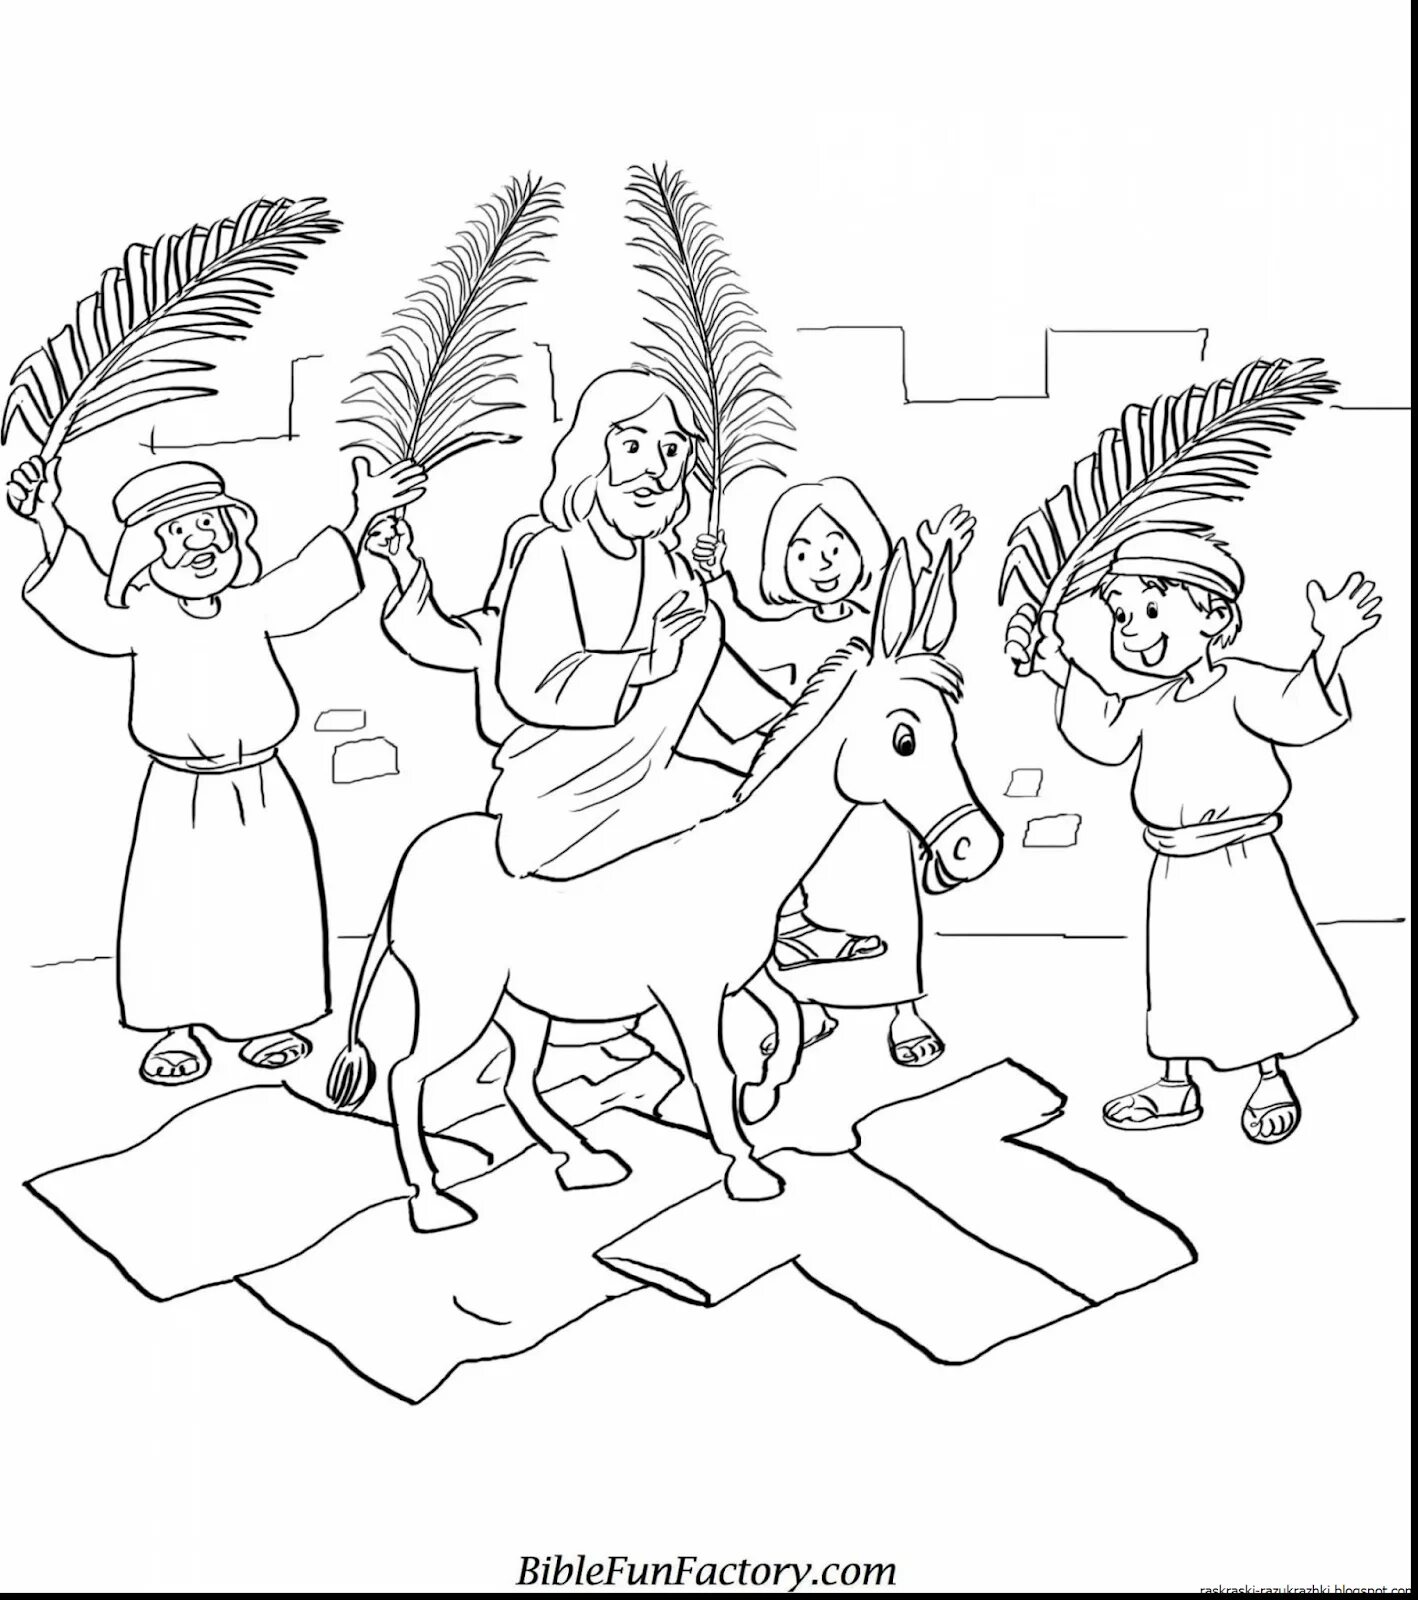 Exquisite christian coloring book for kids